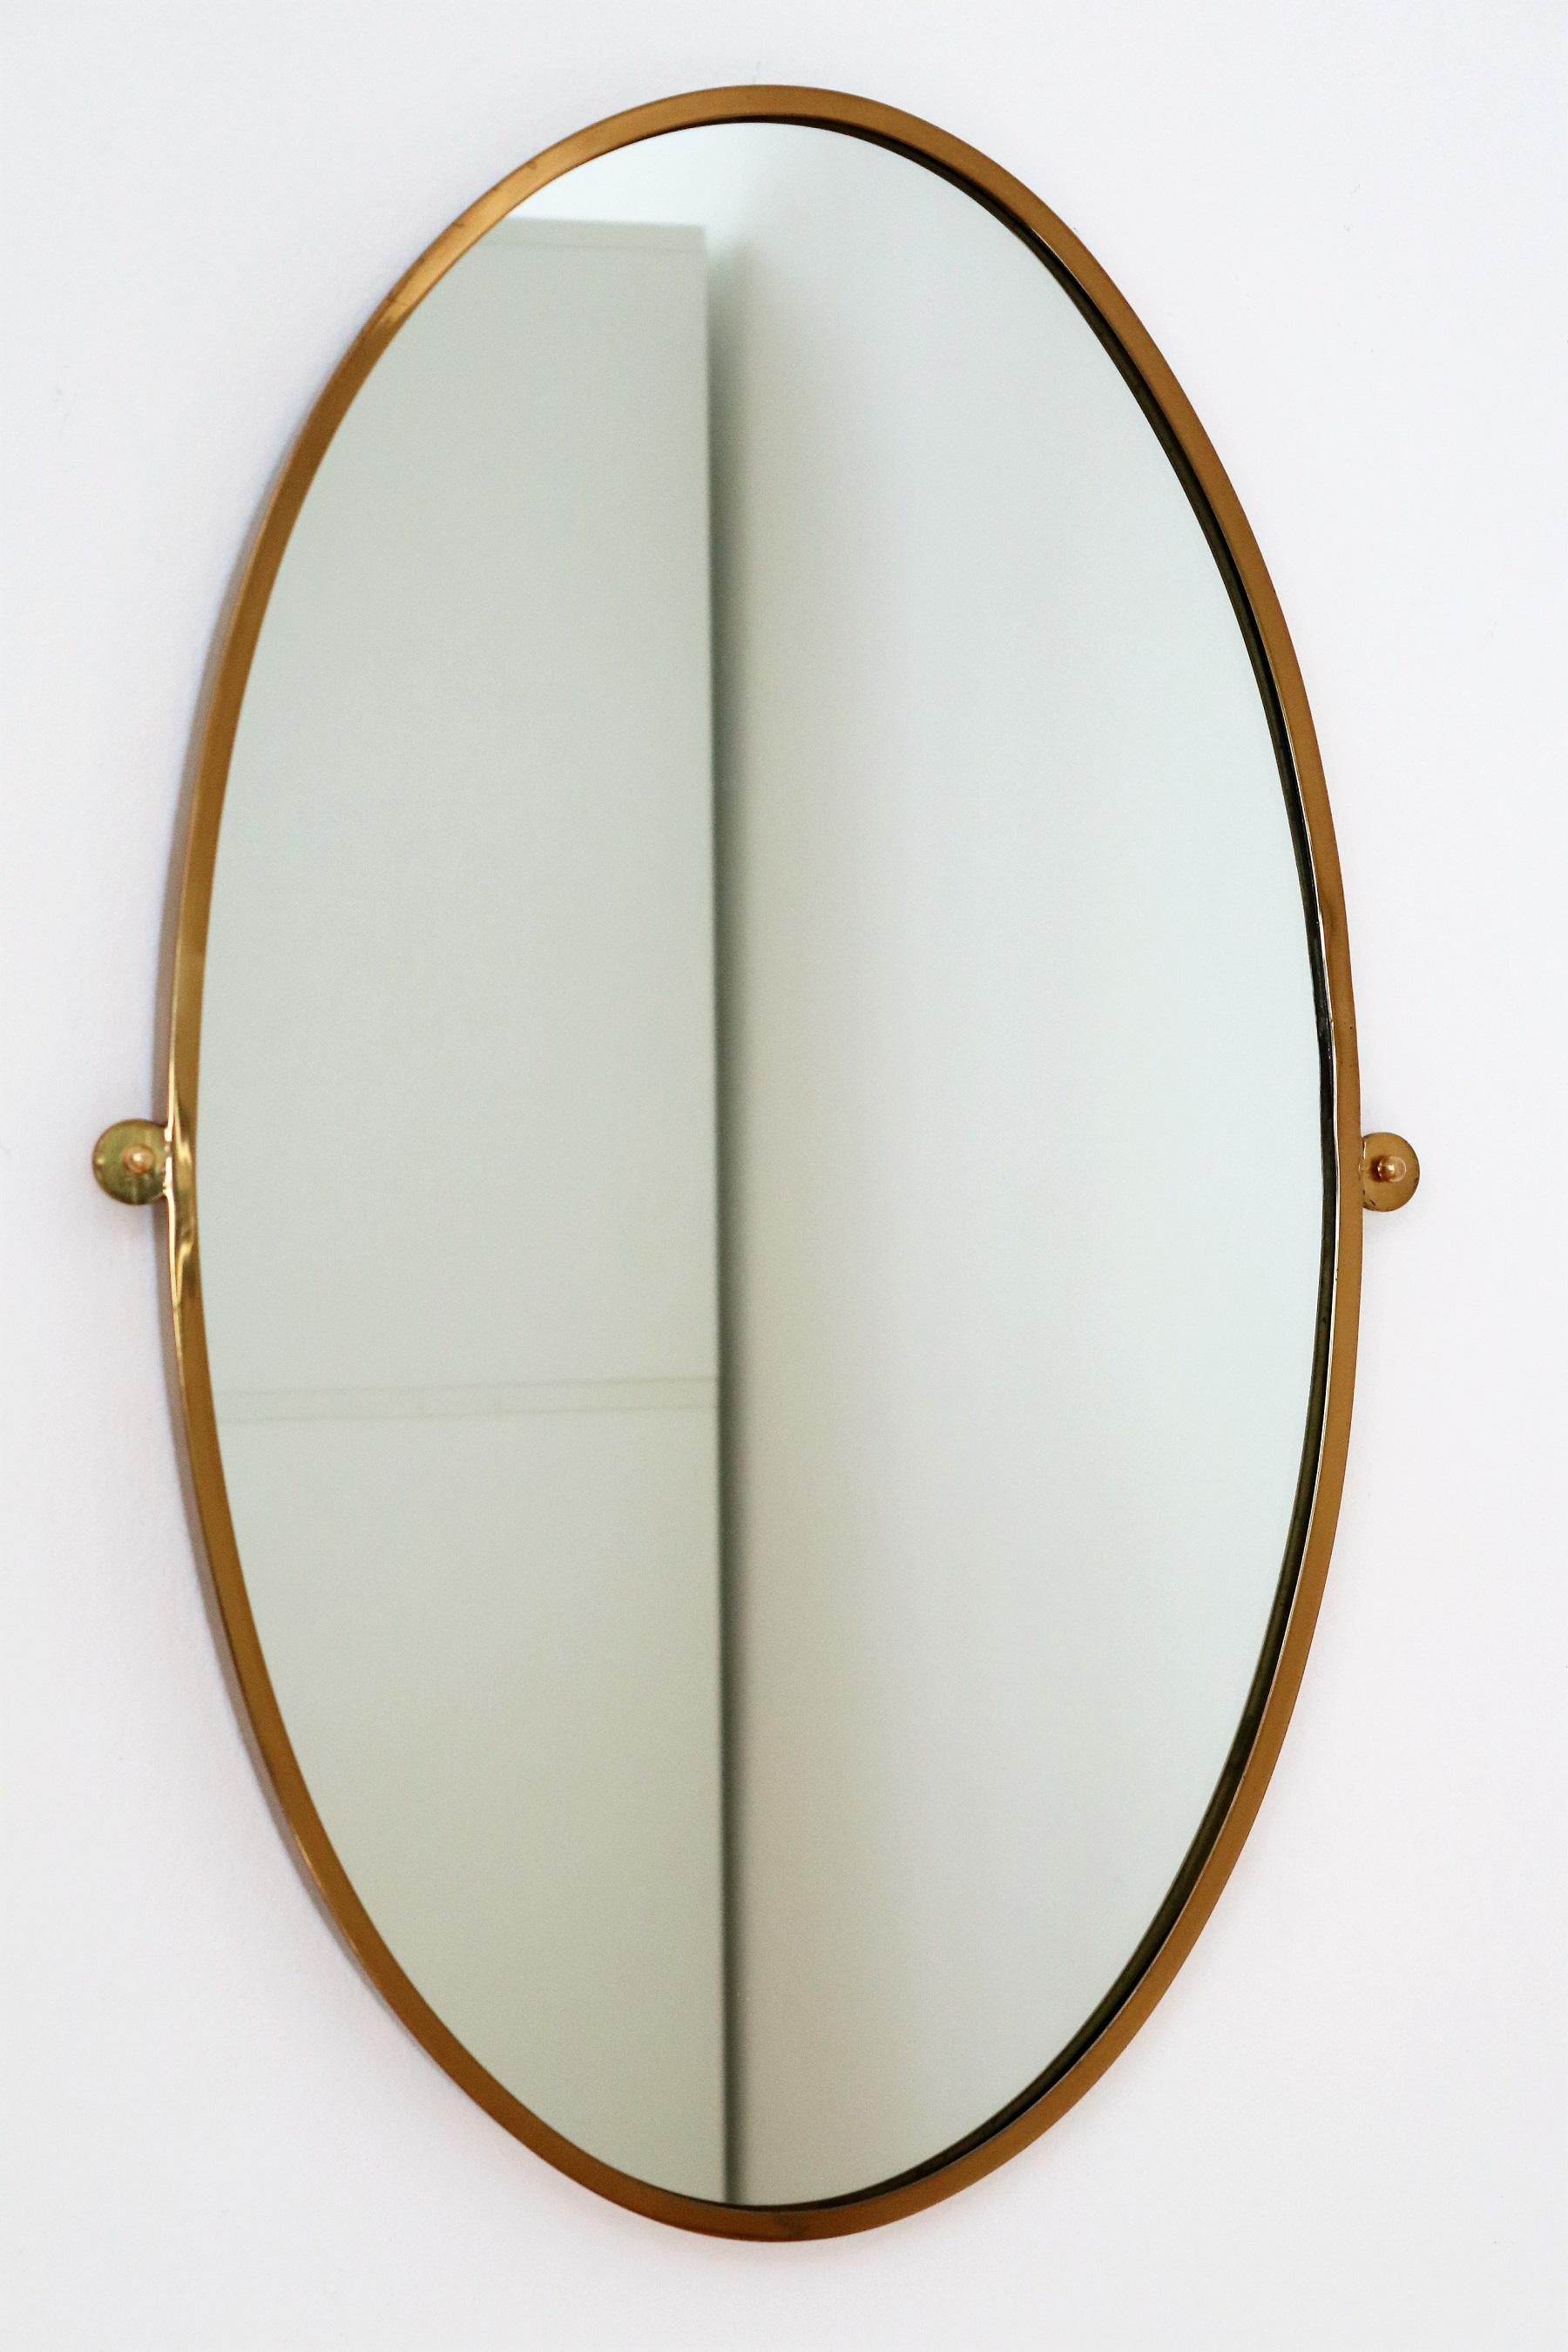 Beautiful Italian mid-century wall mirror with original brass frame with playful details at both sides, also made of brass.
The brass frame is shiny, of thick brass and very elegant. Excellent craftsmanship.
Made in Italy in the 1970s.
The wall